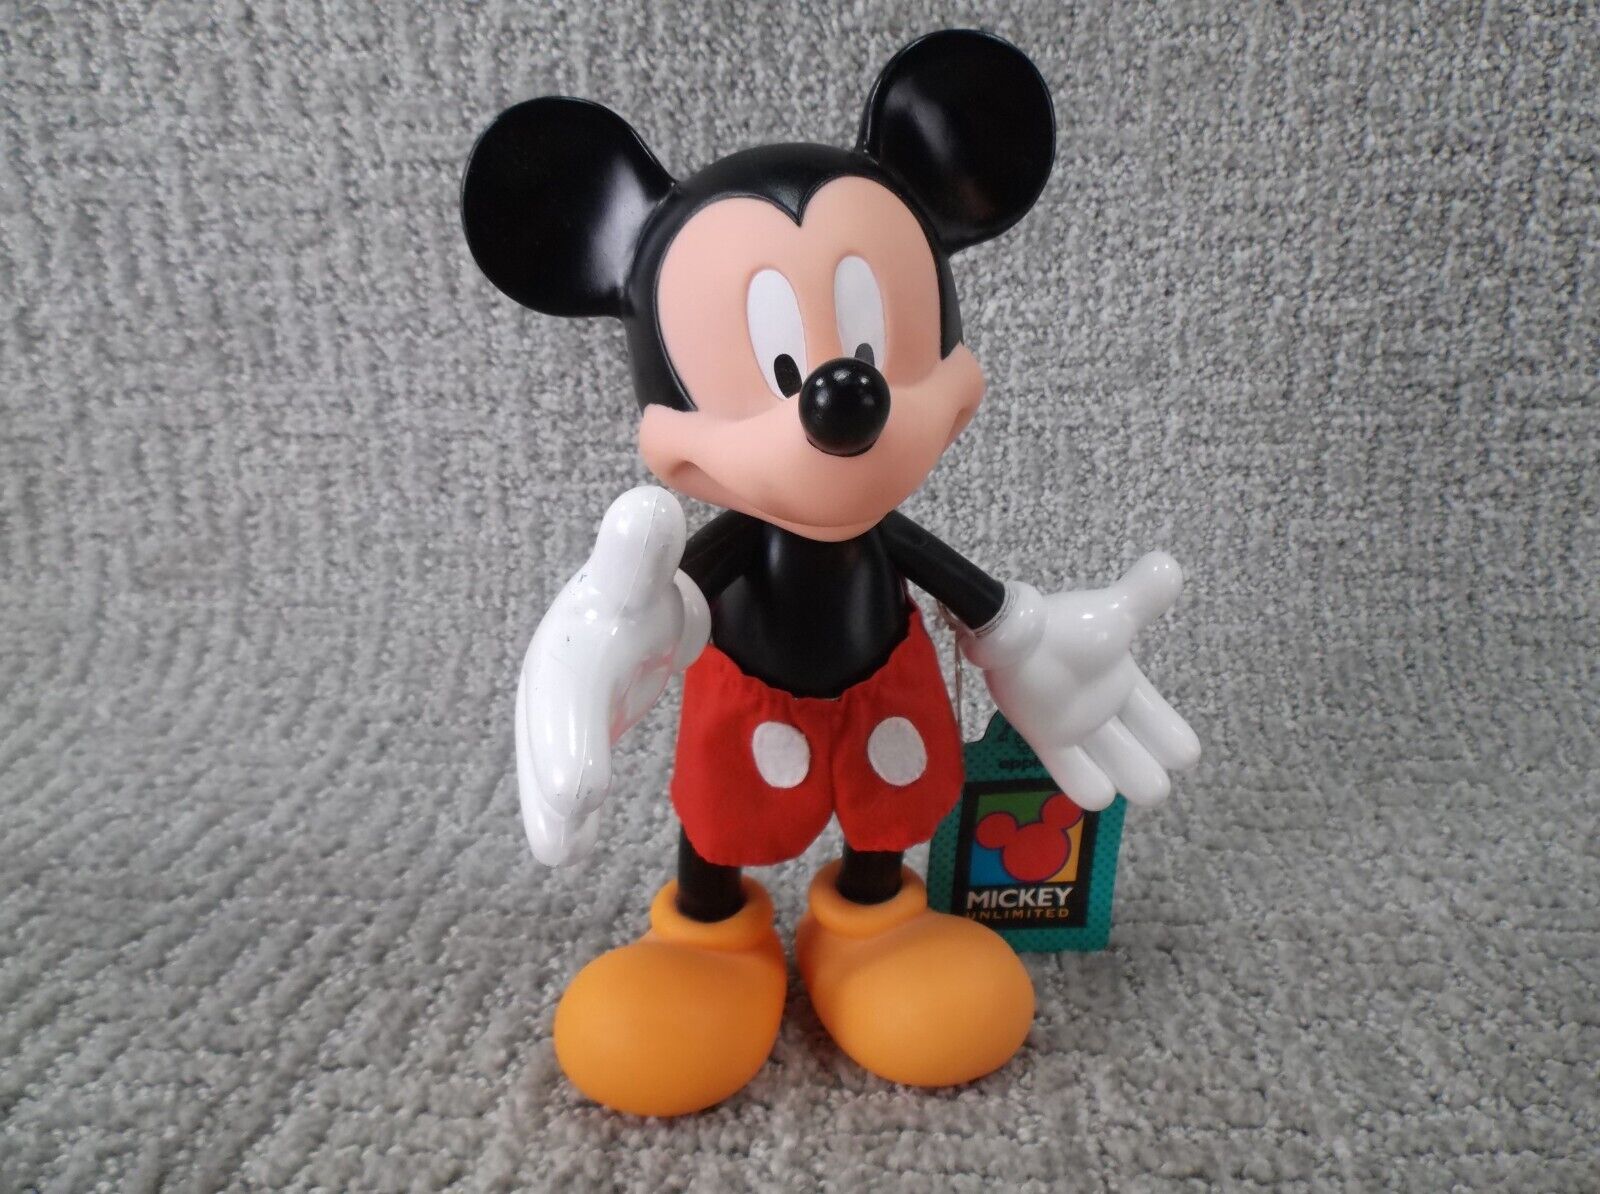 Vintage Disney Mickey Mouse Figure Vinyl Toy Moving Arms Legs Neck  8.5” 